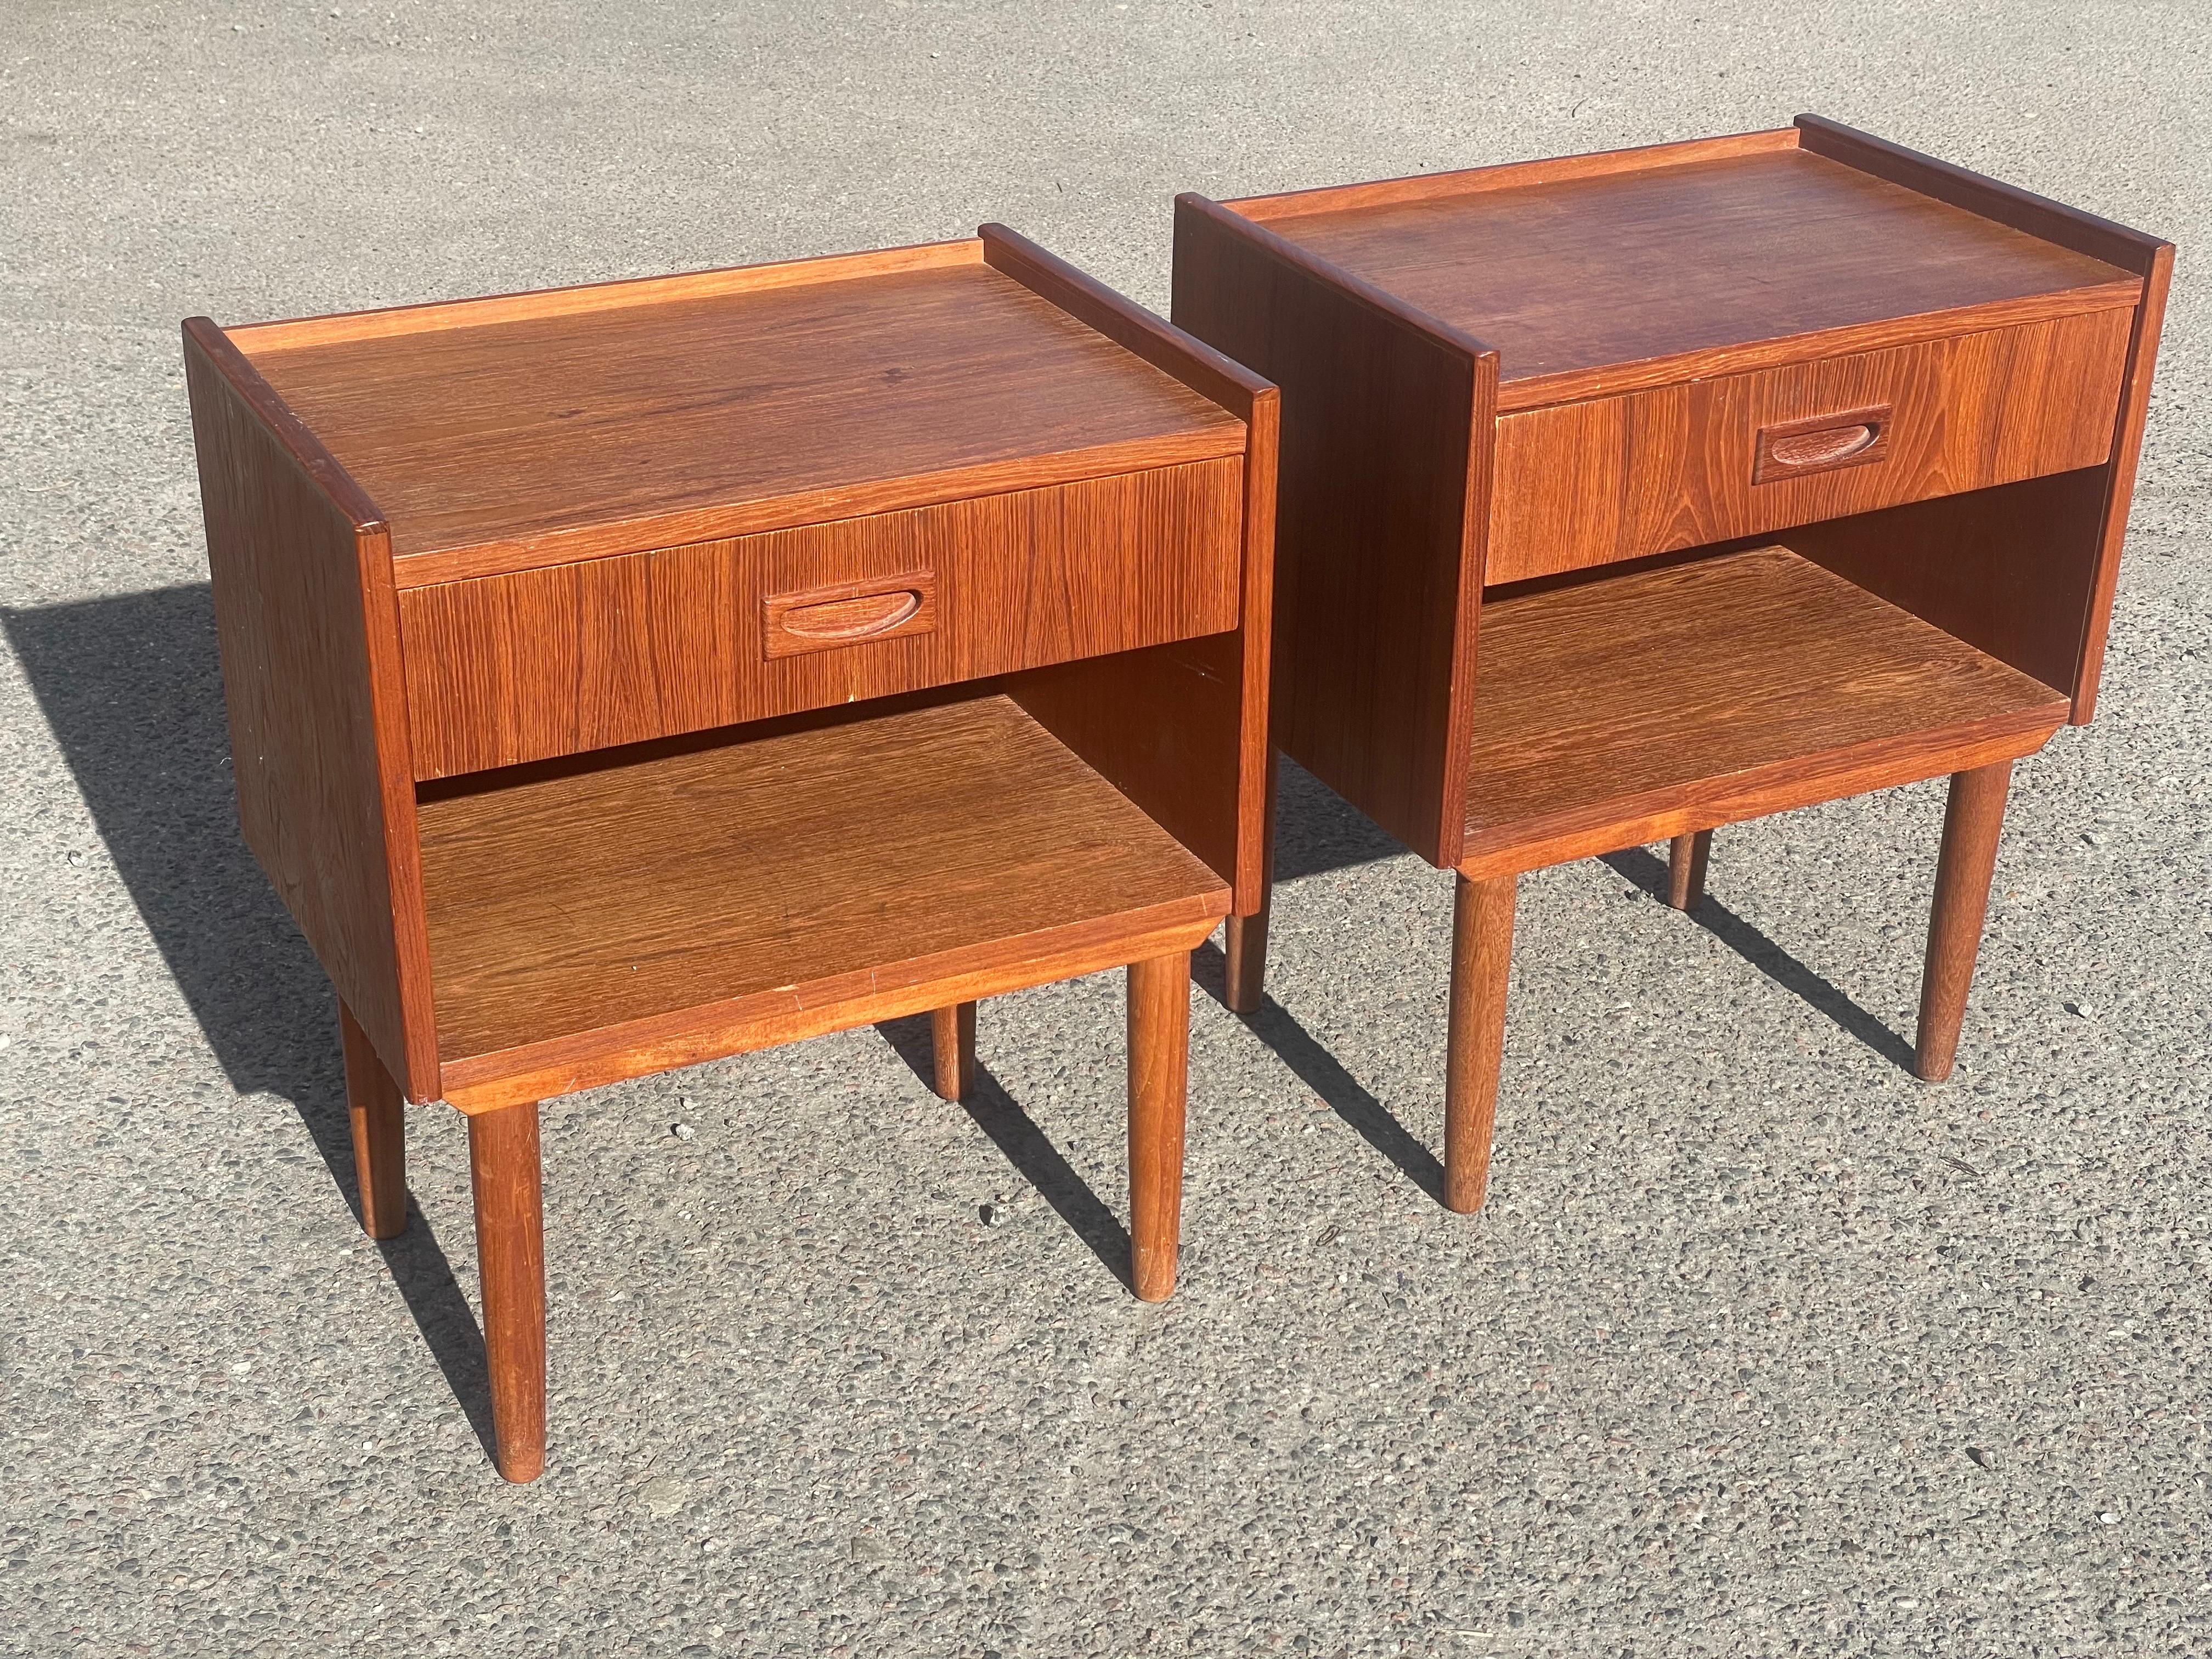 Introducing a set of teak nightstands with drawers from Denmark in the 1960s. These nightstands are the perfect blend of form and function, showcasing the iconic design style that Denmark is renowned for.
The spacious drawers effortlessly glide